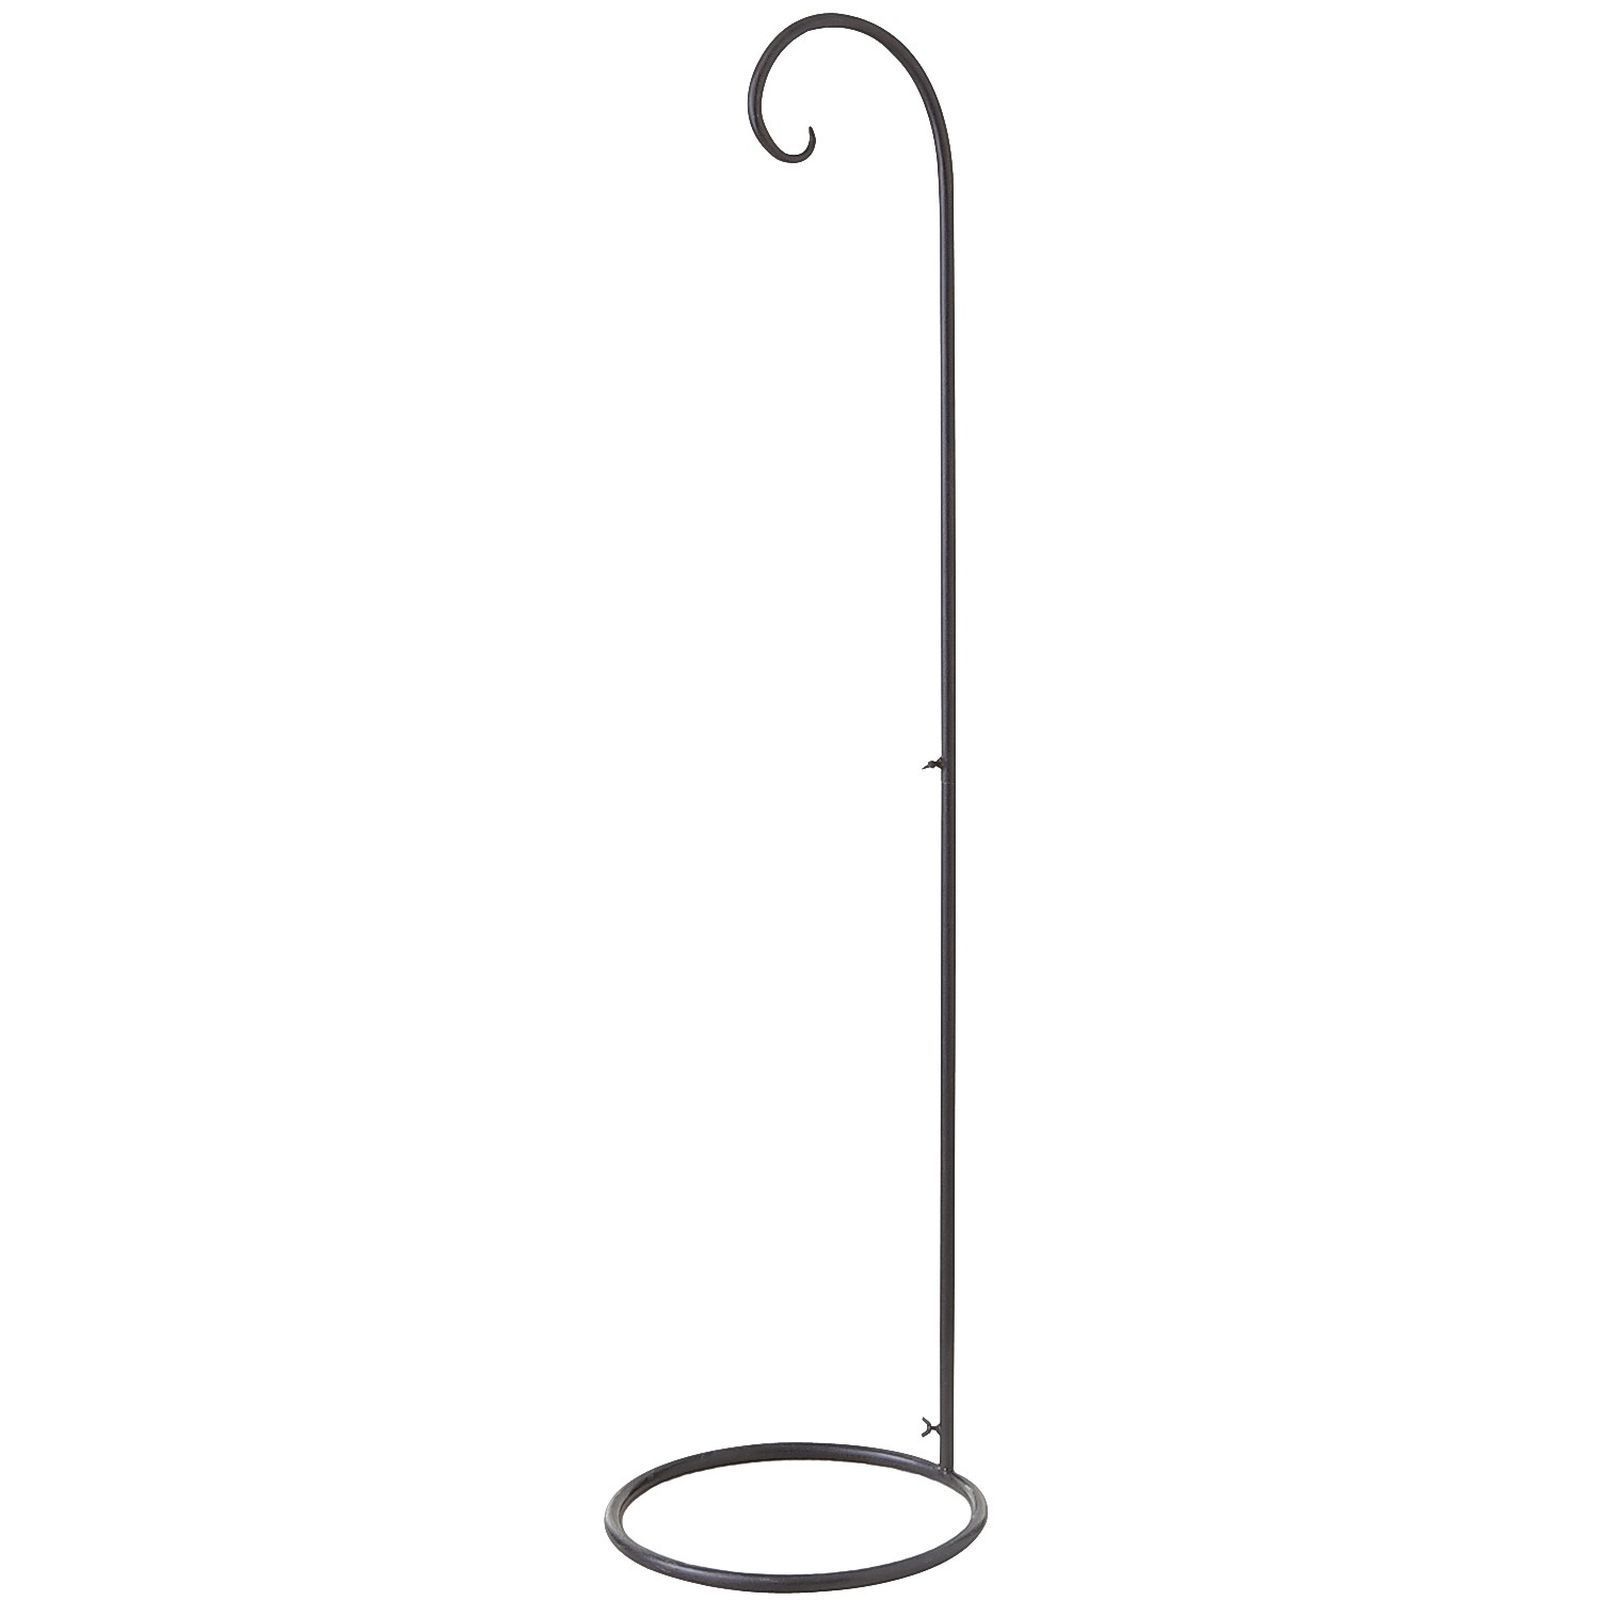 Outdoor Hanging Lanterns With Stand With Regard To 2019 Crafted Of Wrought Iron, This Sturdy Stand Accommodates Hanging (View 1 of 20)